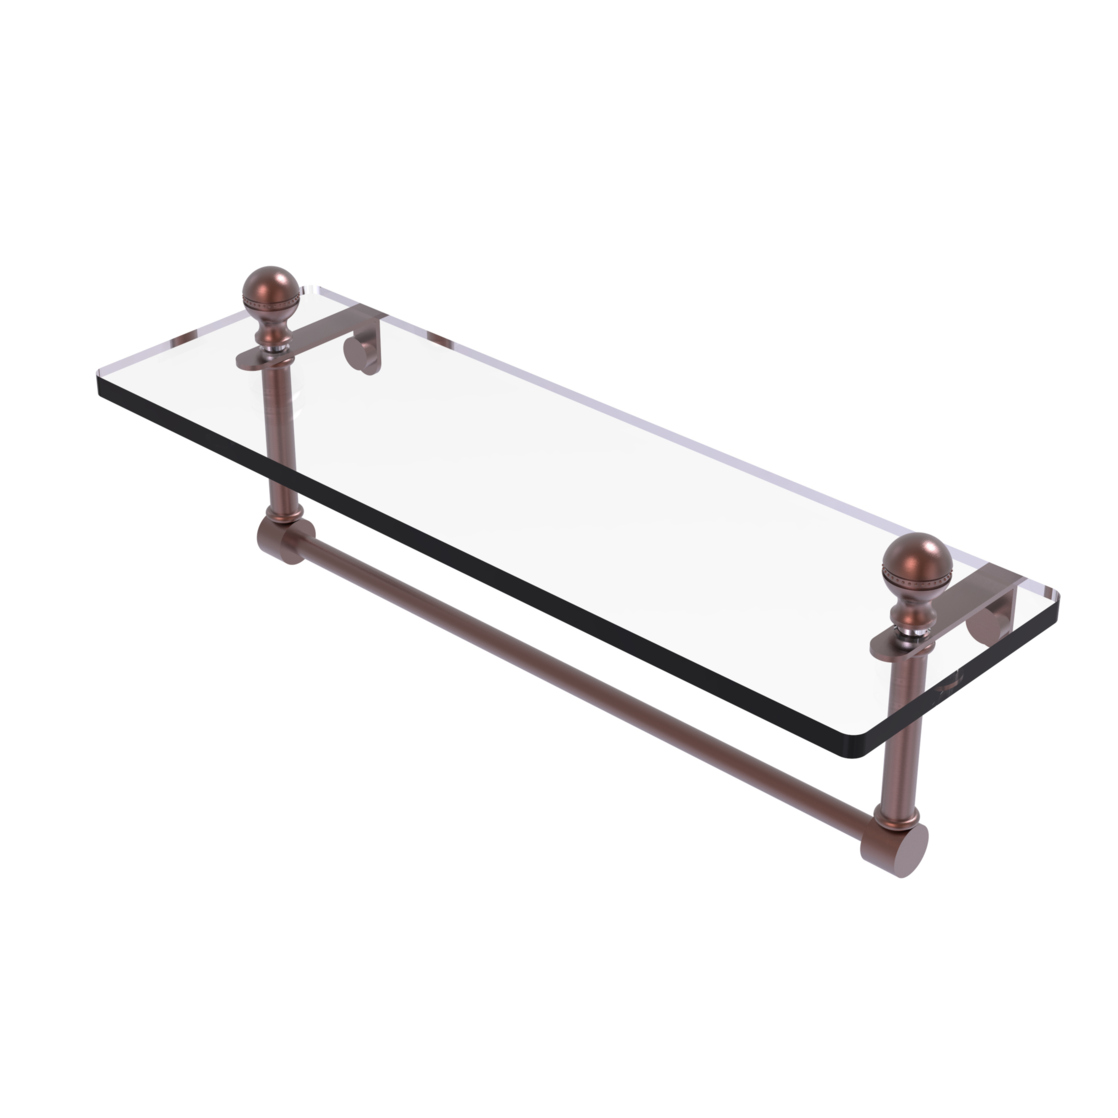 Mambo 16-in  Glass Vanity Shelf  with Integrated Towel Bar in Antique Copper - image 1 of 1